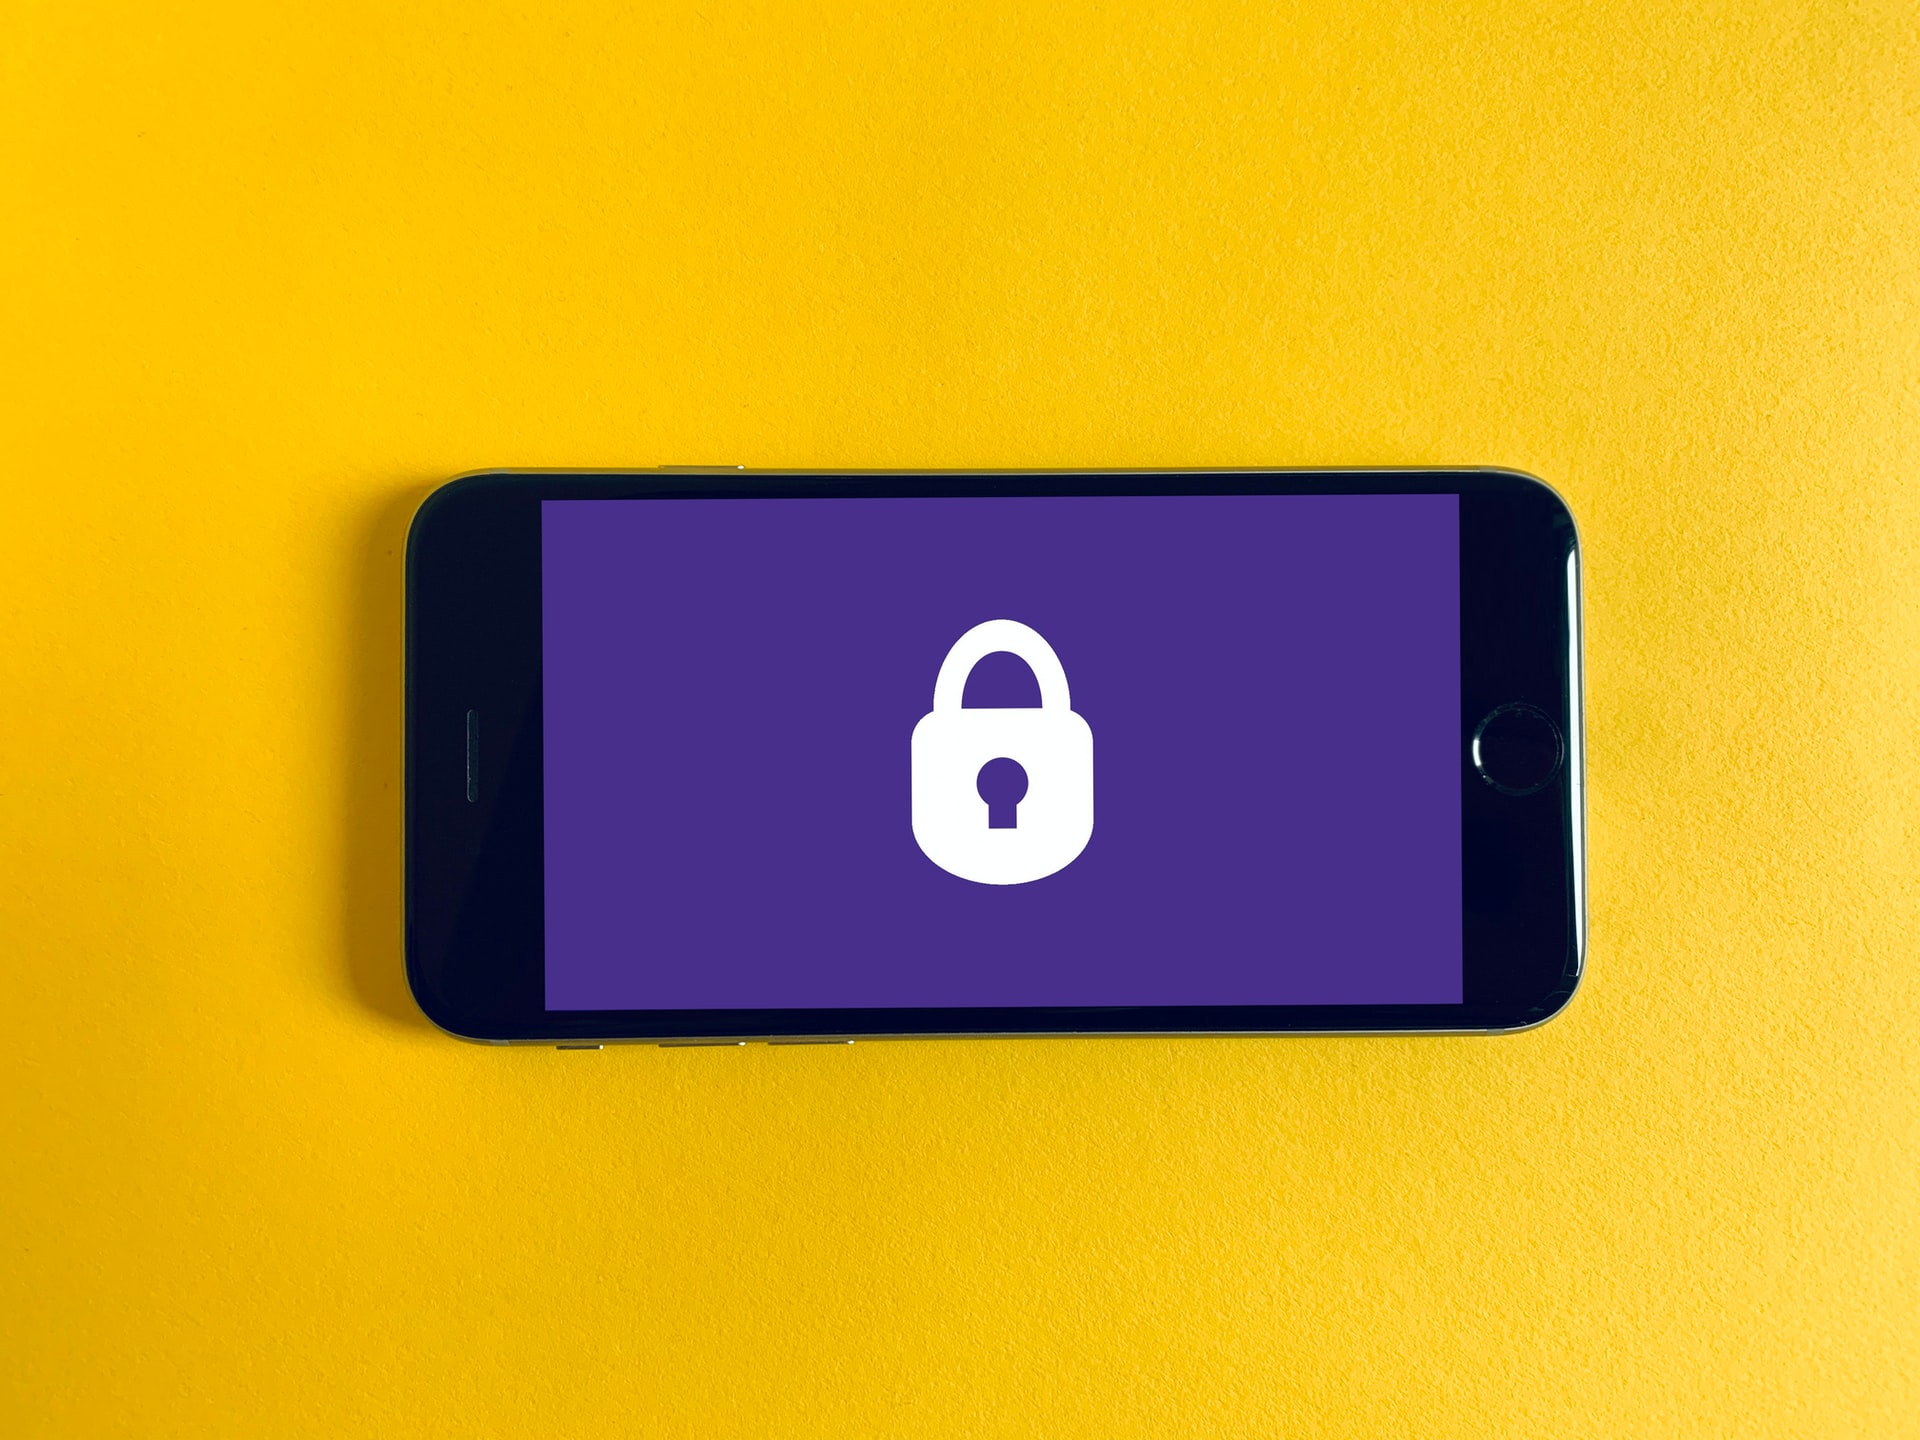 iPhone against a yellow backdrop displaying a lock symbol